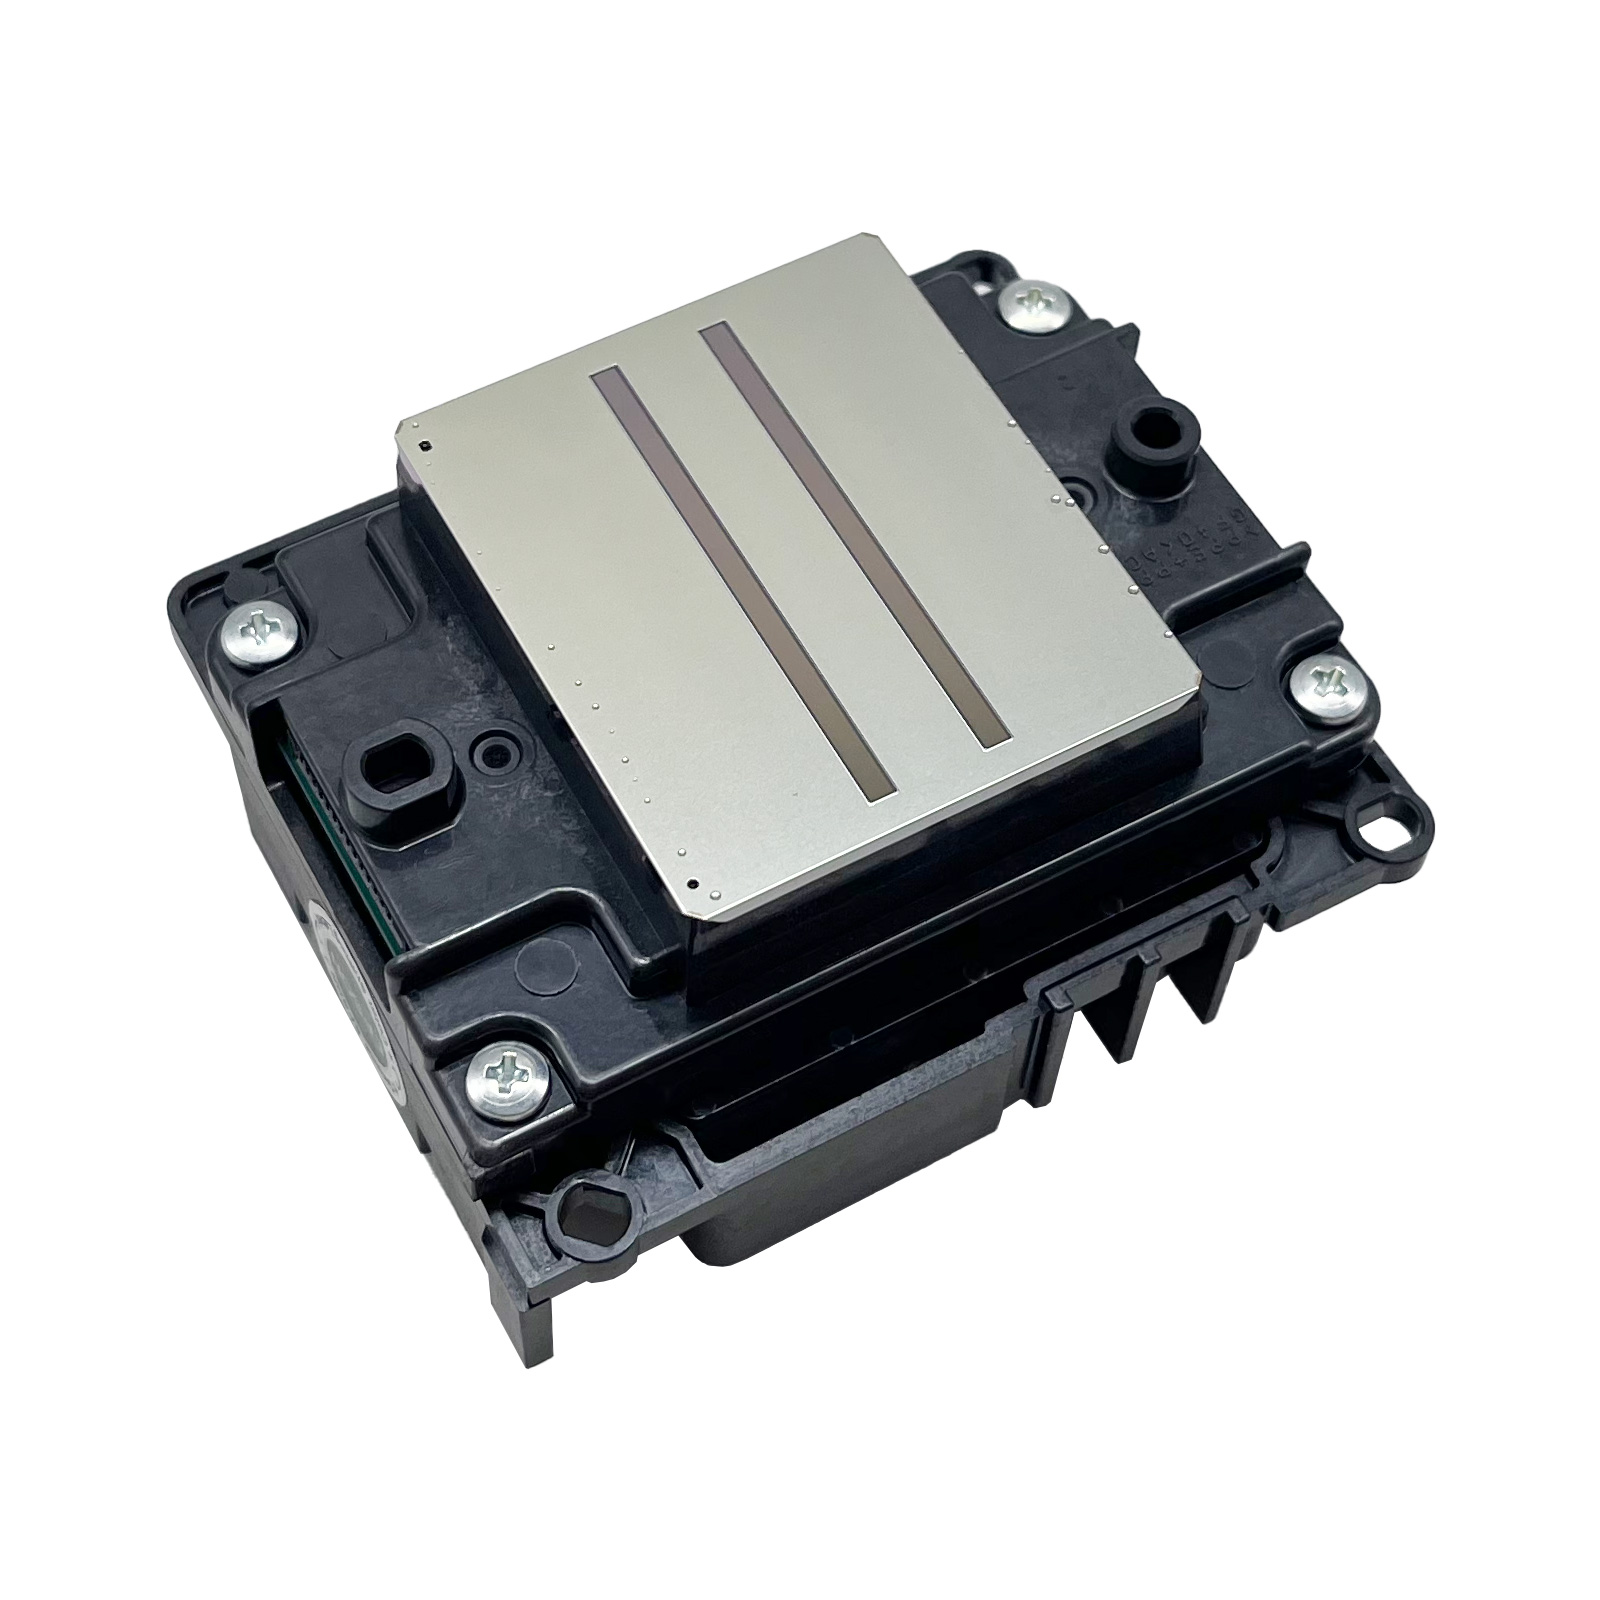 Epson I1600-A1 Water-based Printhead